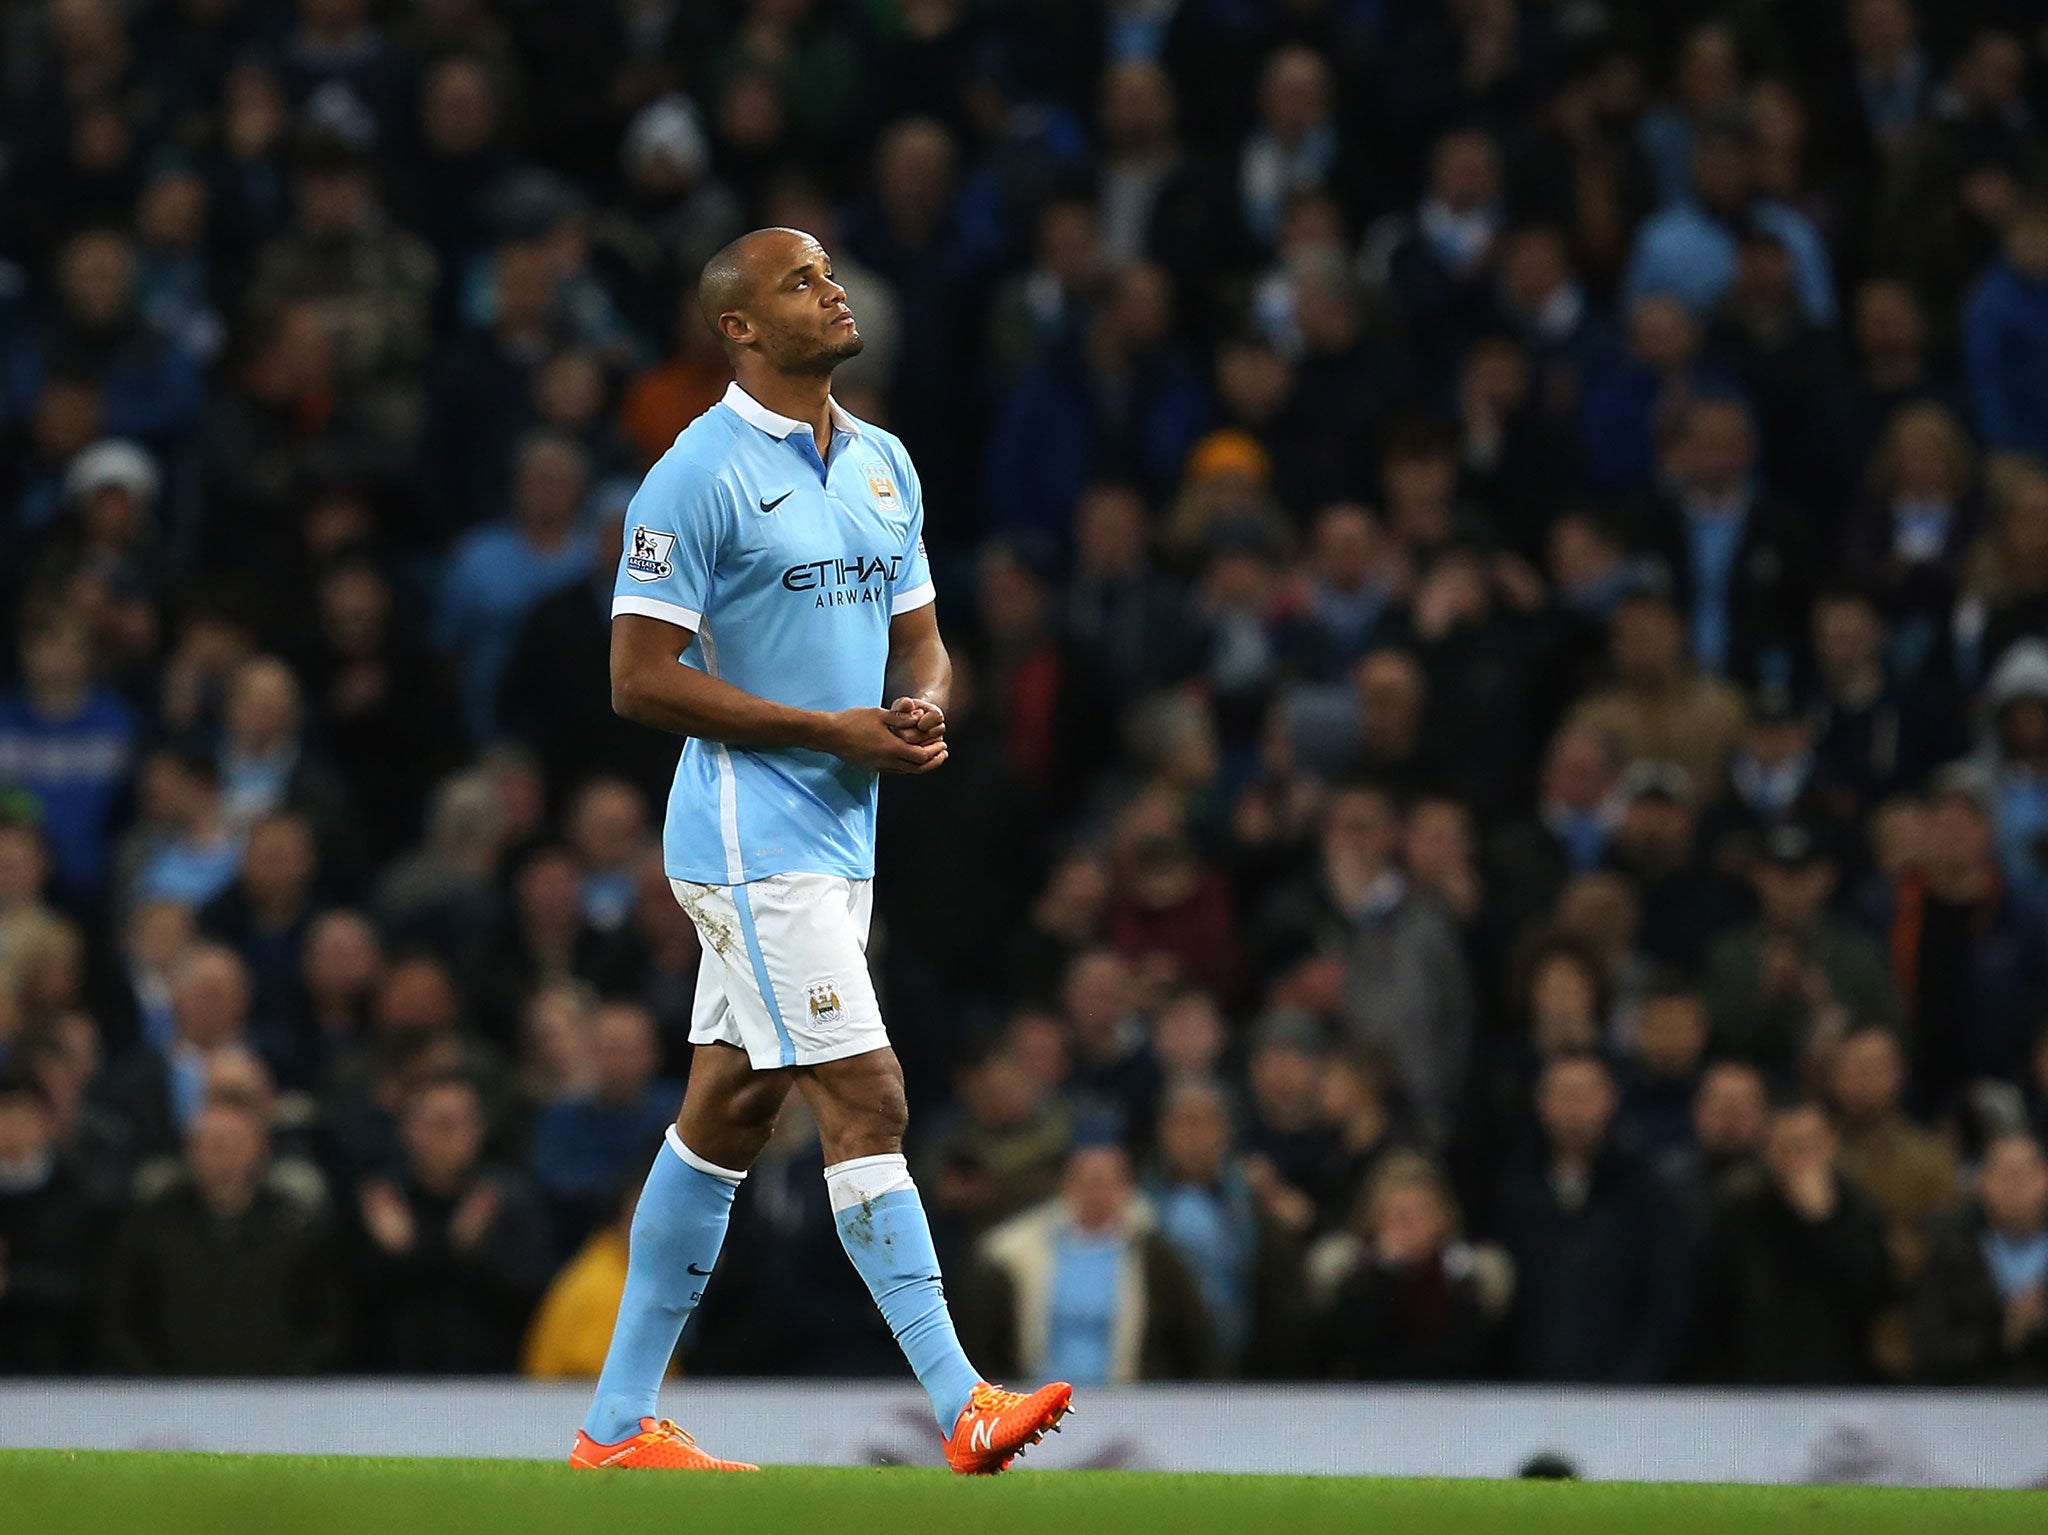 Vincent Kompany is nearing a return to Premier League football after four months of absence